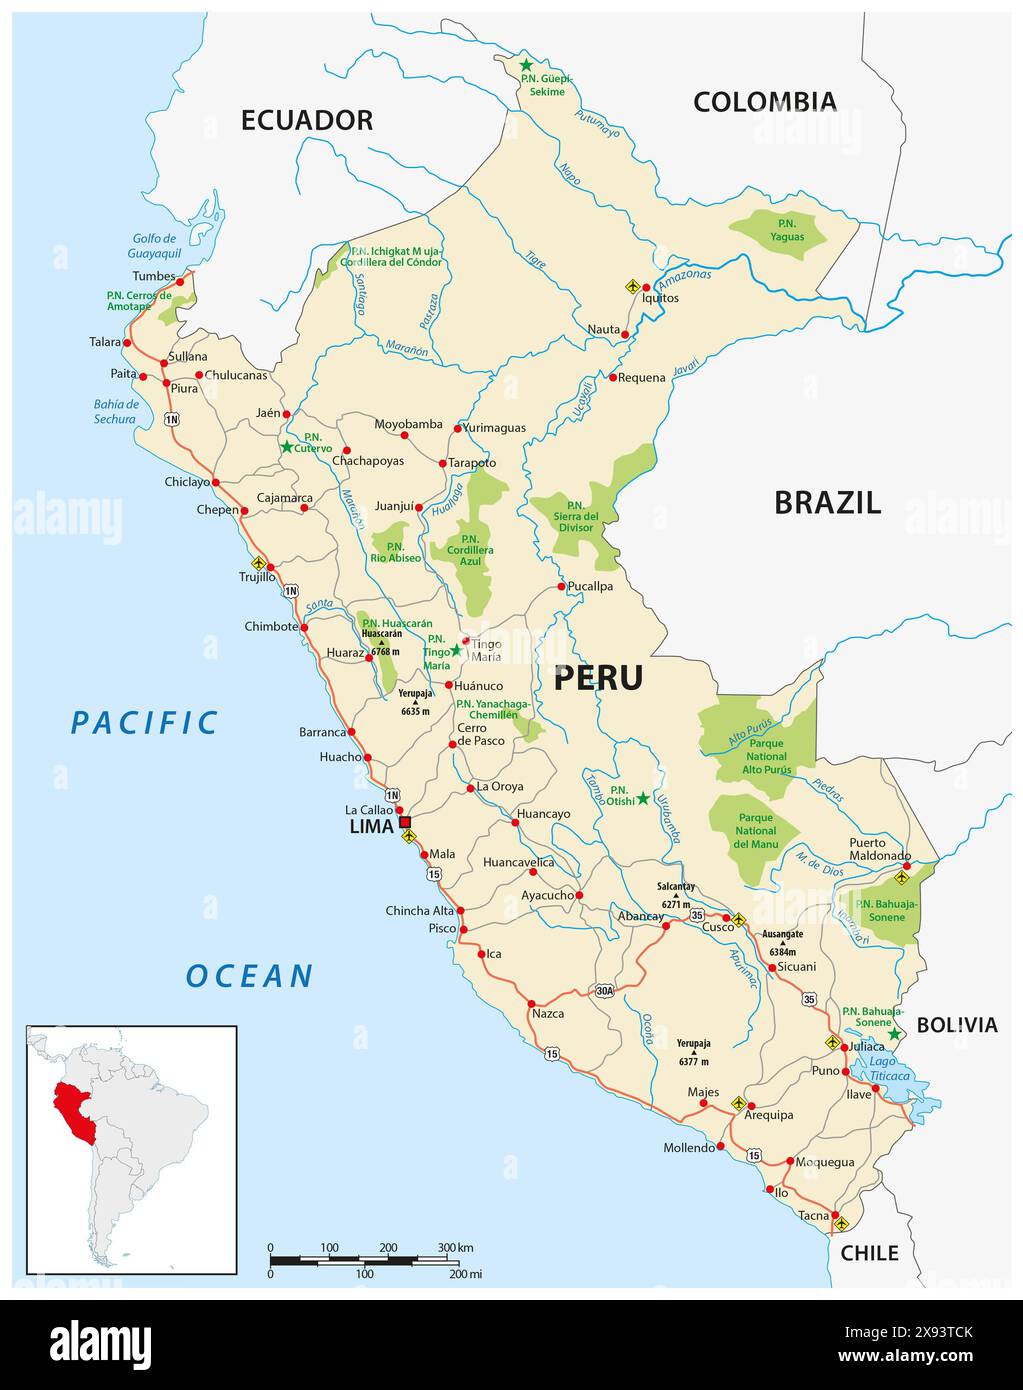 Peru road and national park map Stock Photo